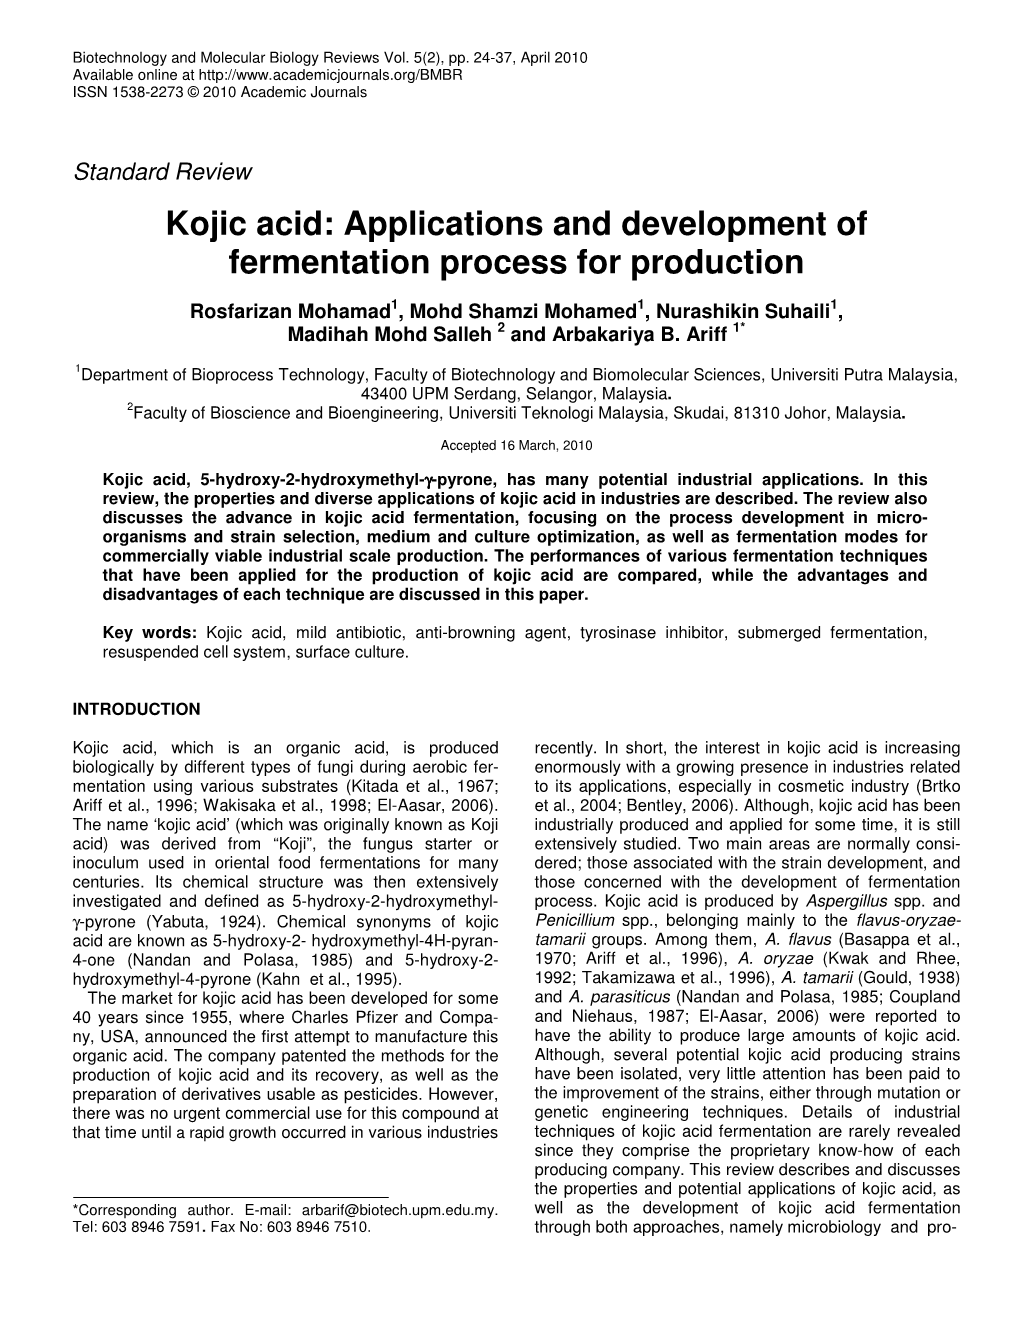 Kojic Acid: Applications and Development of Fermentation Process for Production